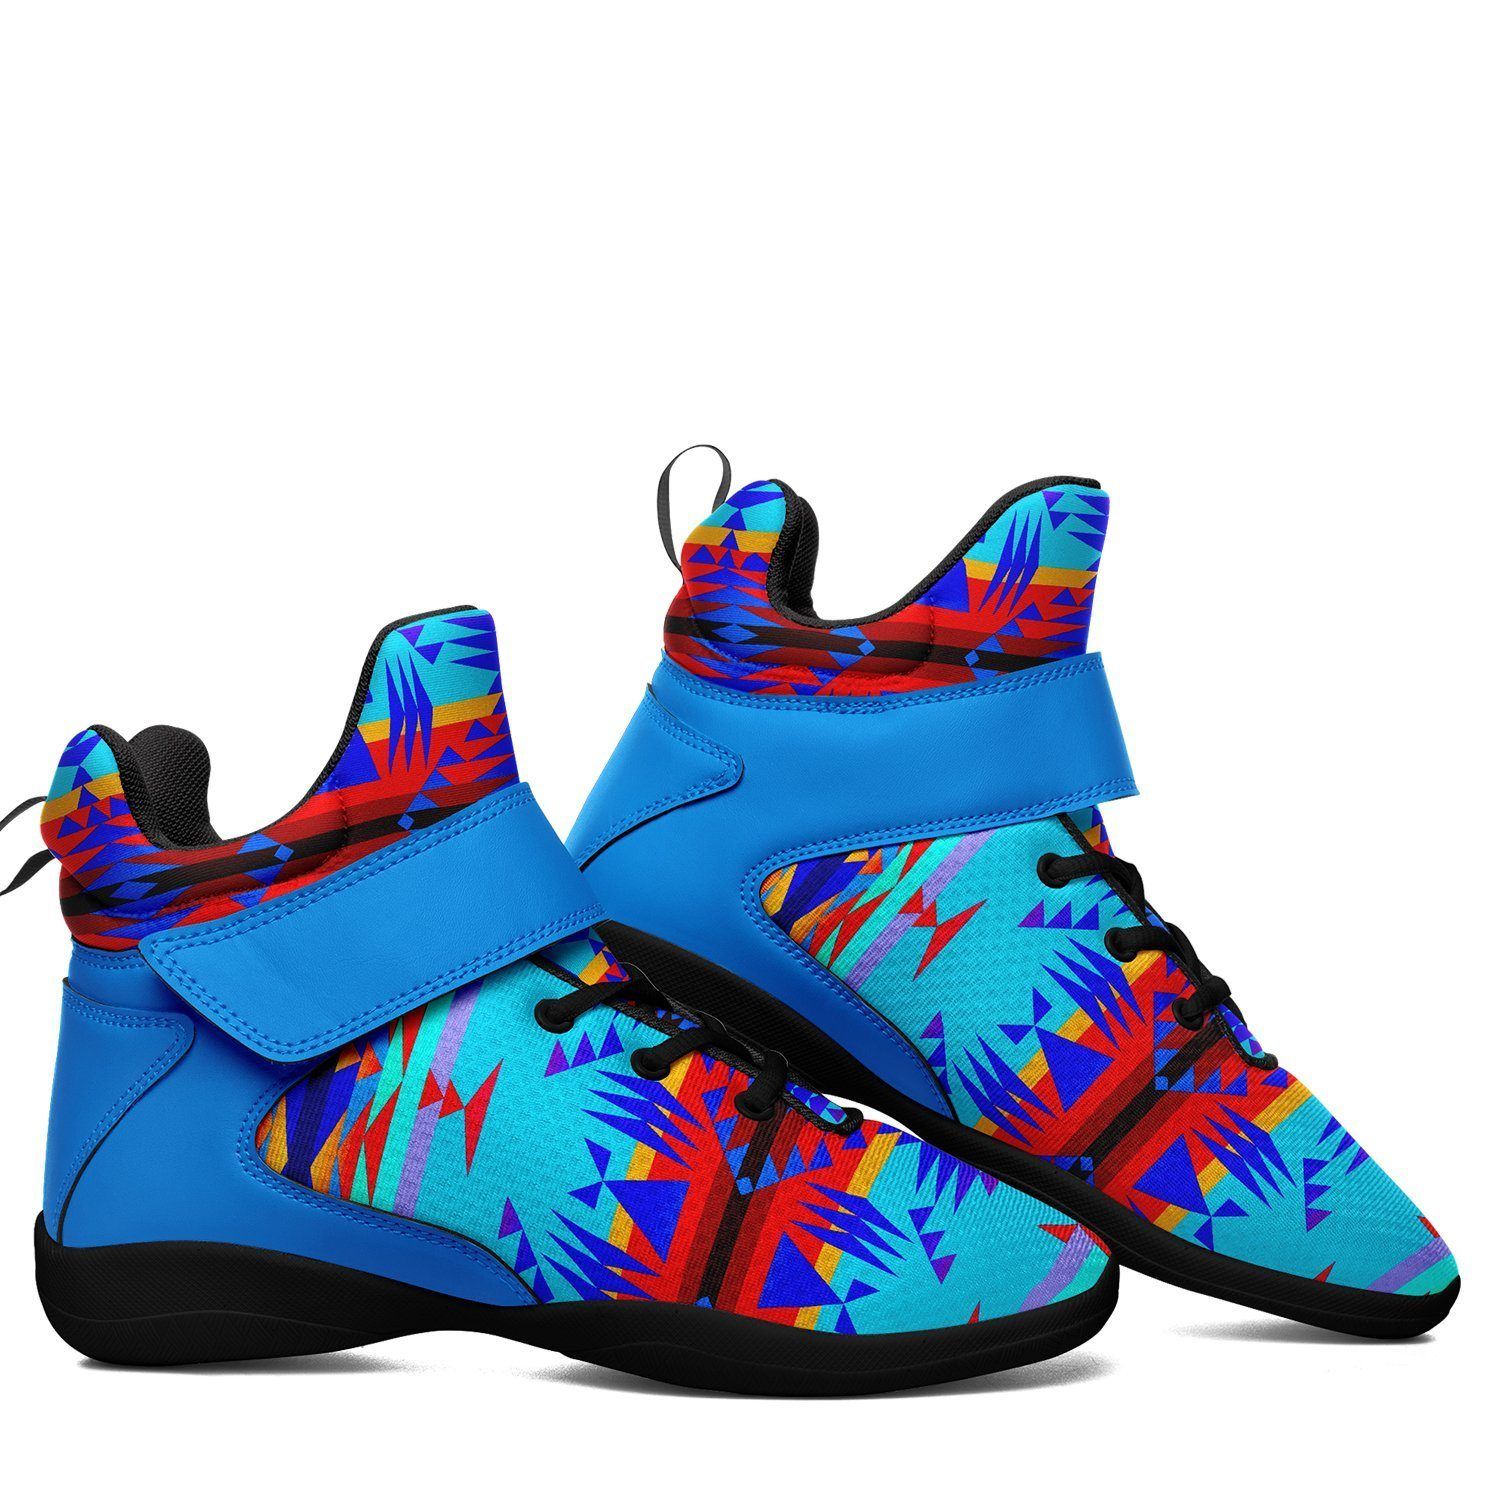 Between the Mountains Blue Ipottaa Basketball / Sport High Top Shoes - Black Sole 49 Dzine 